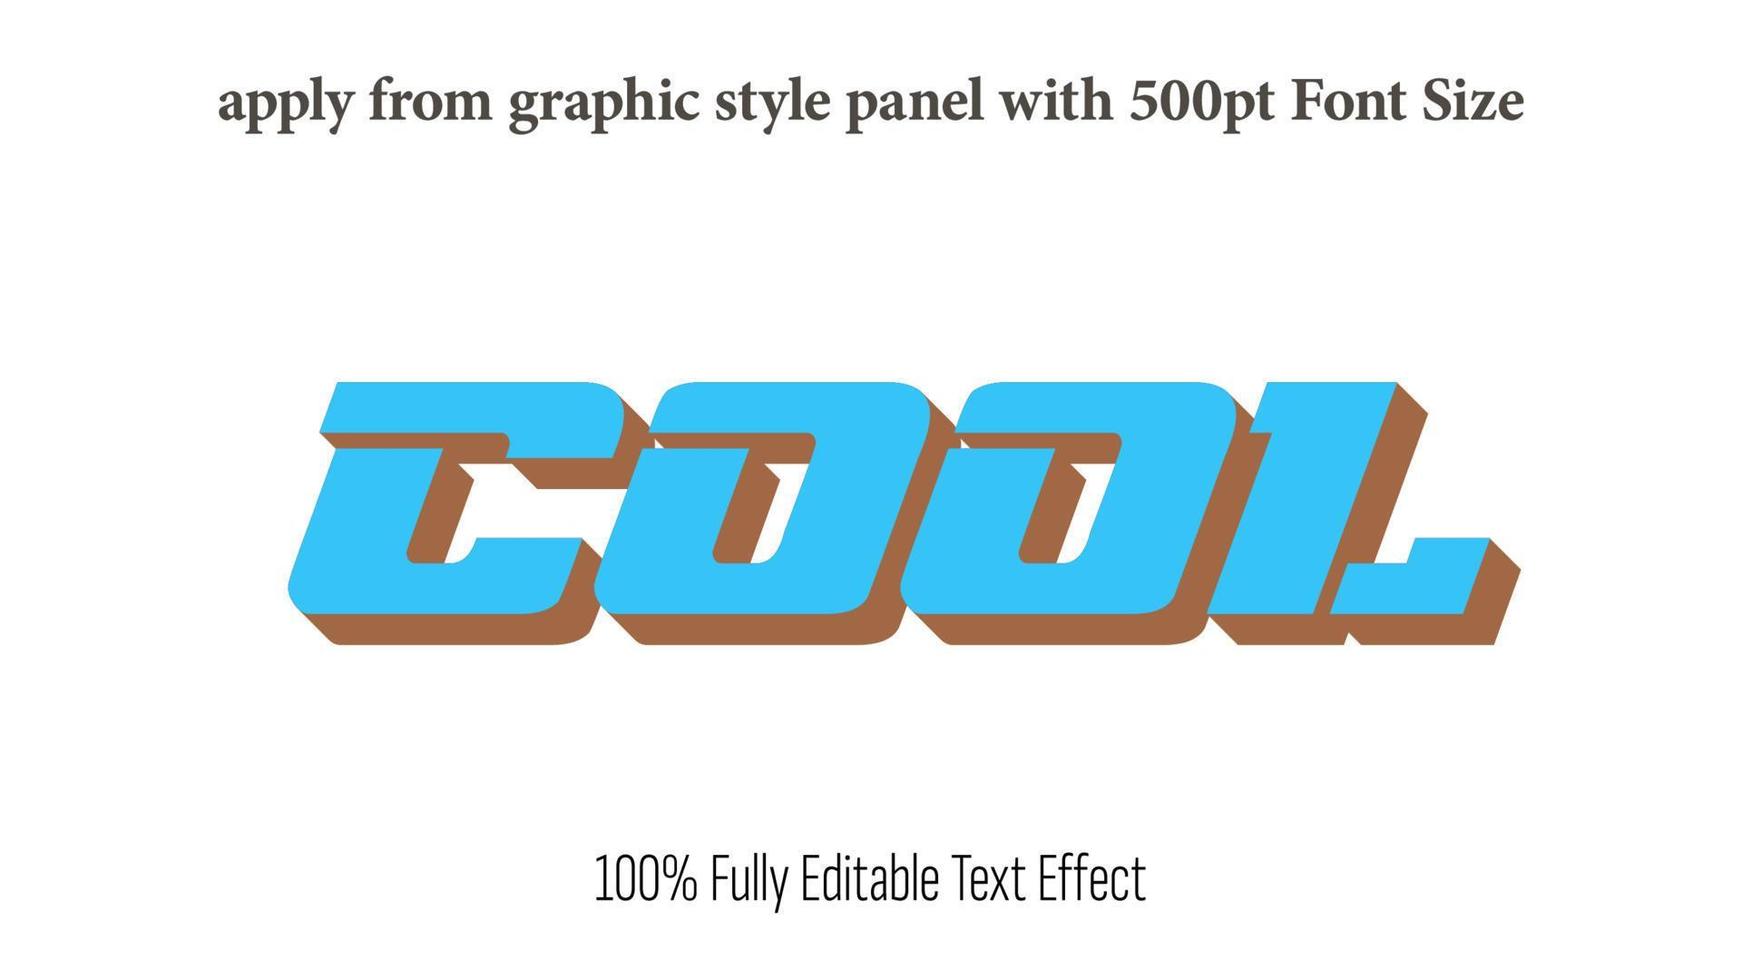 text effect - Graphic Style vector